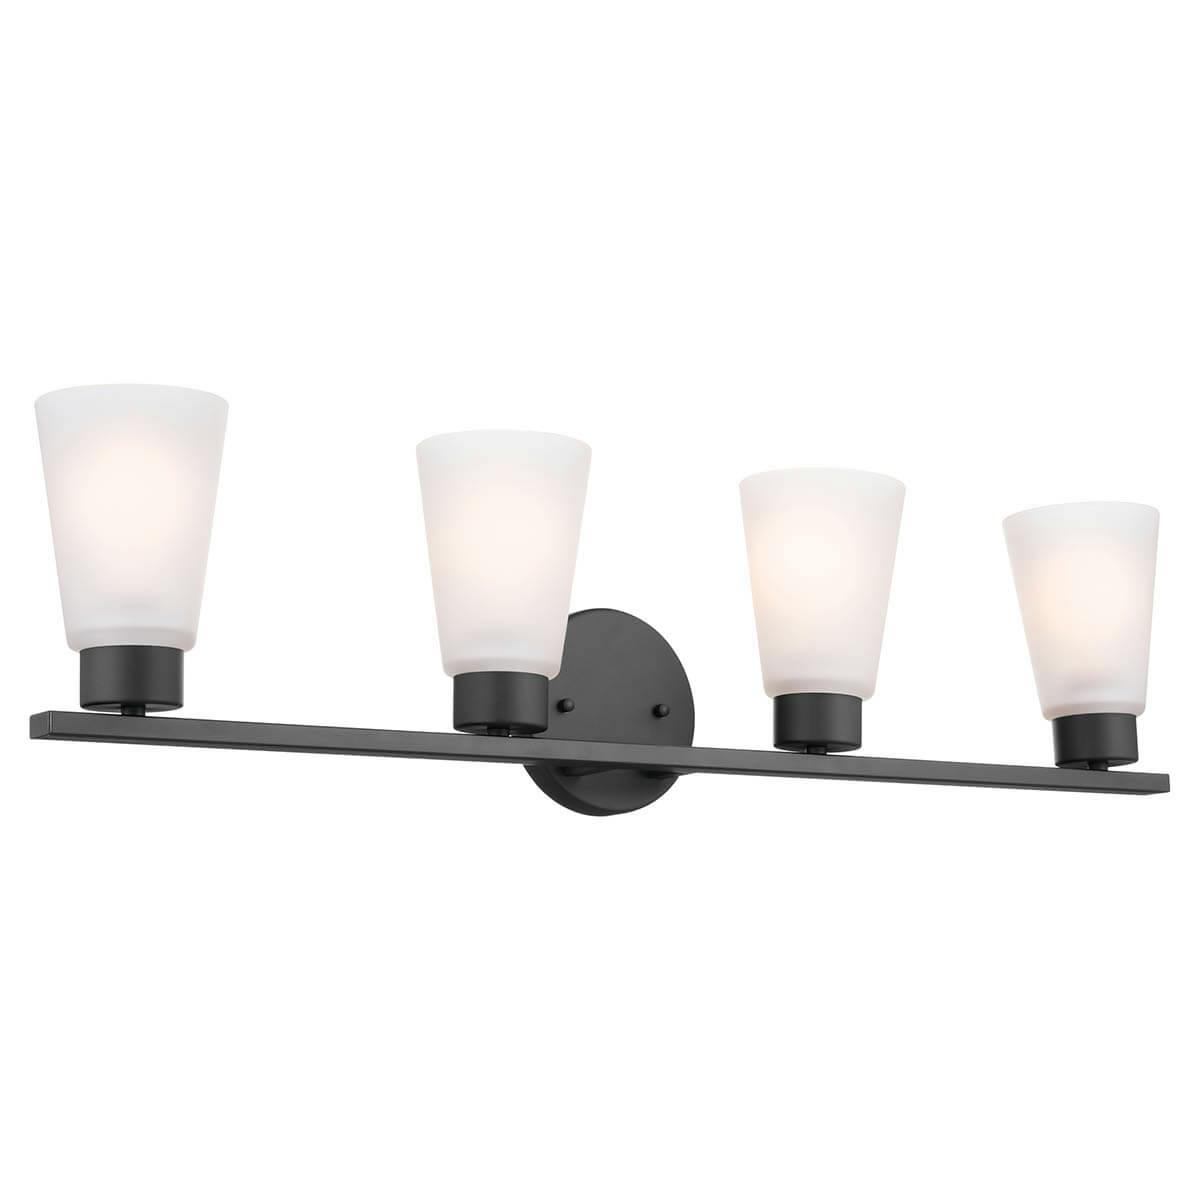 The Stamos 26" 4 Light Vanity Light Black facing up on a white background